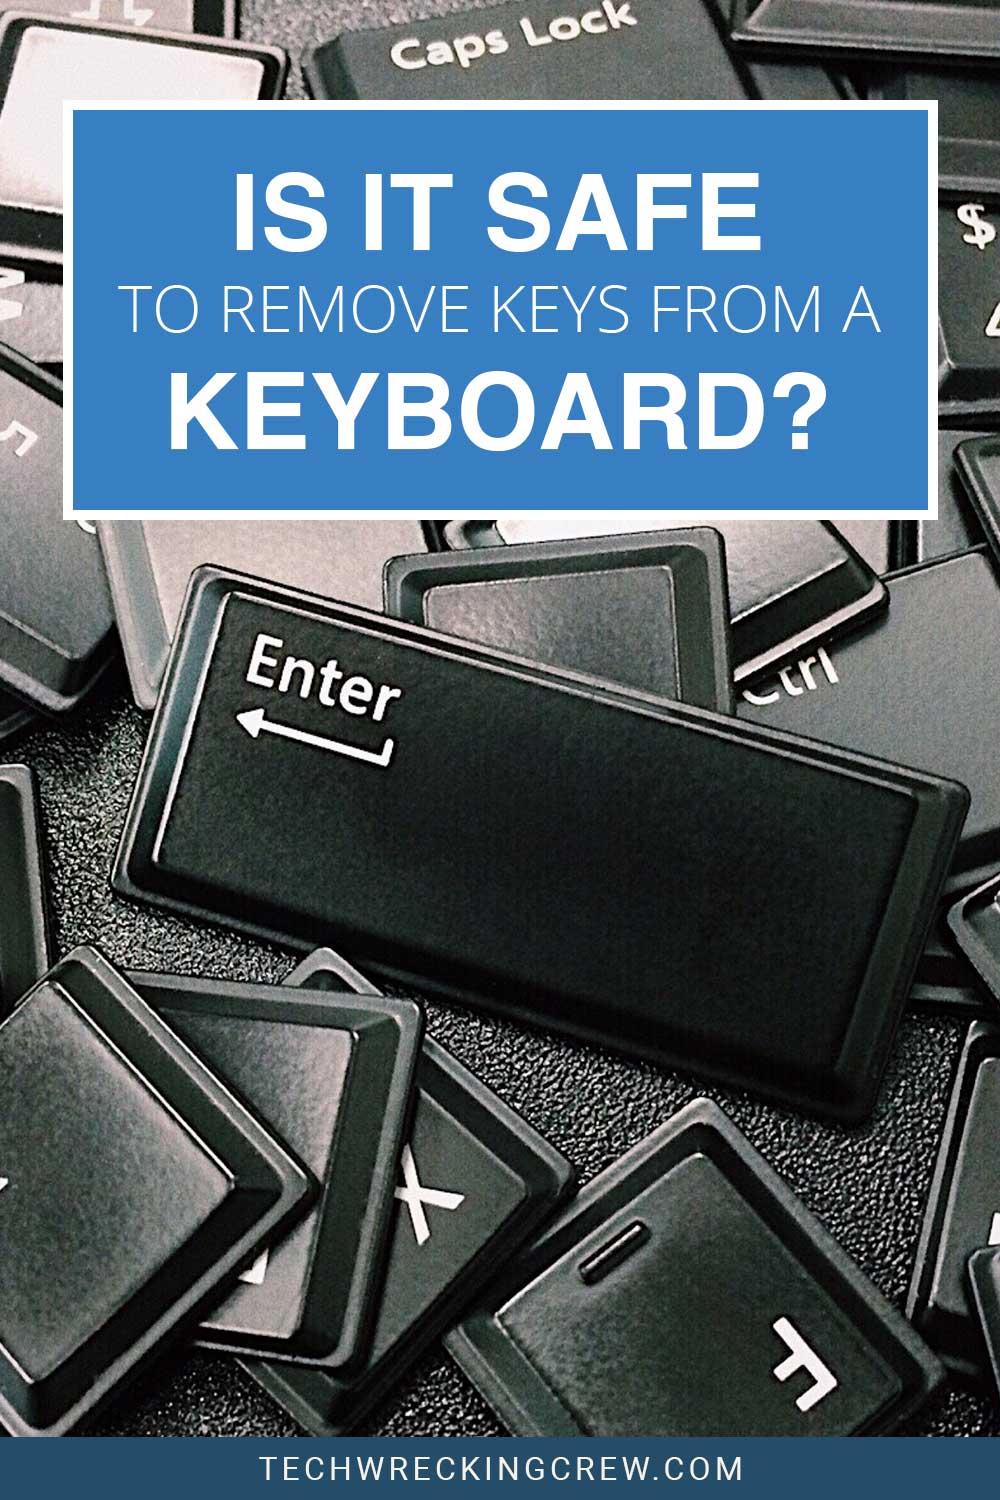 Is It Safe to Remove Keys From a Keyboard?